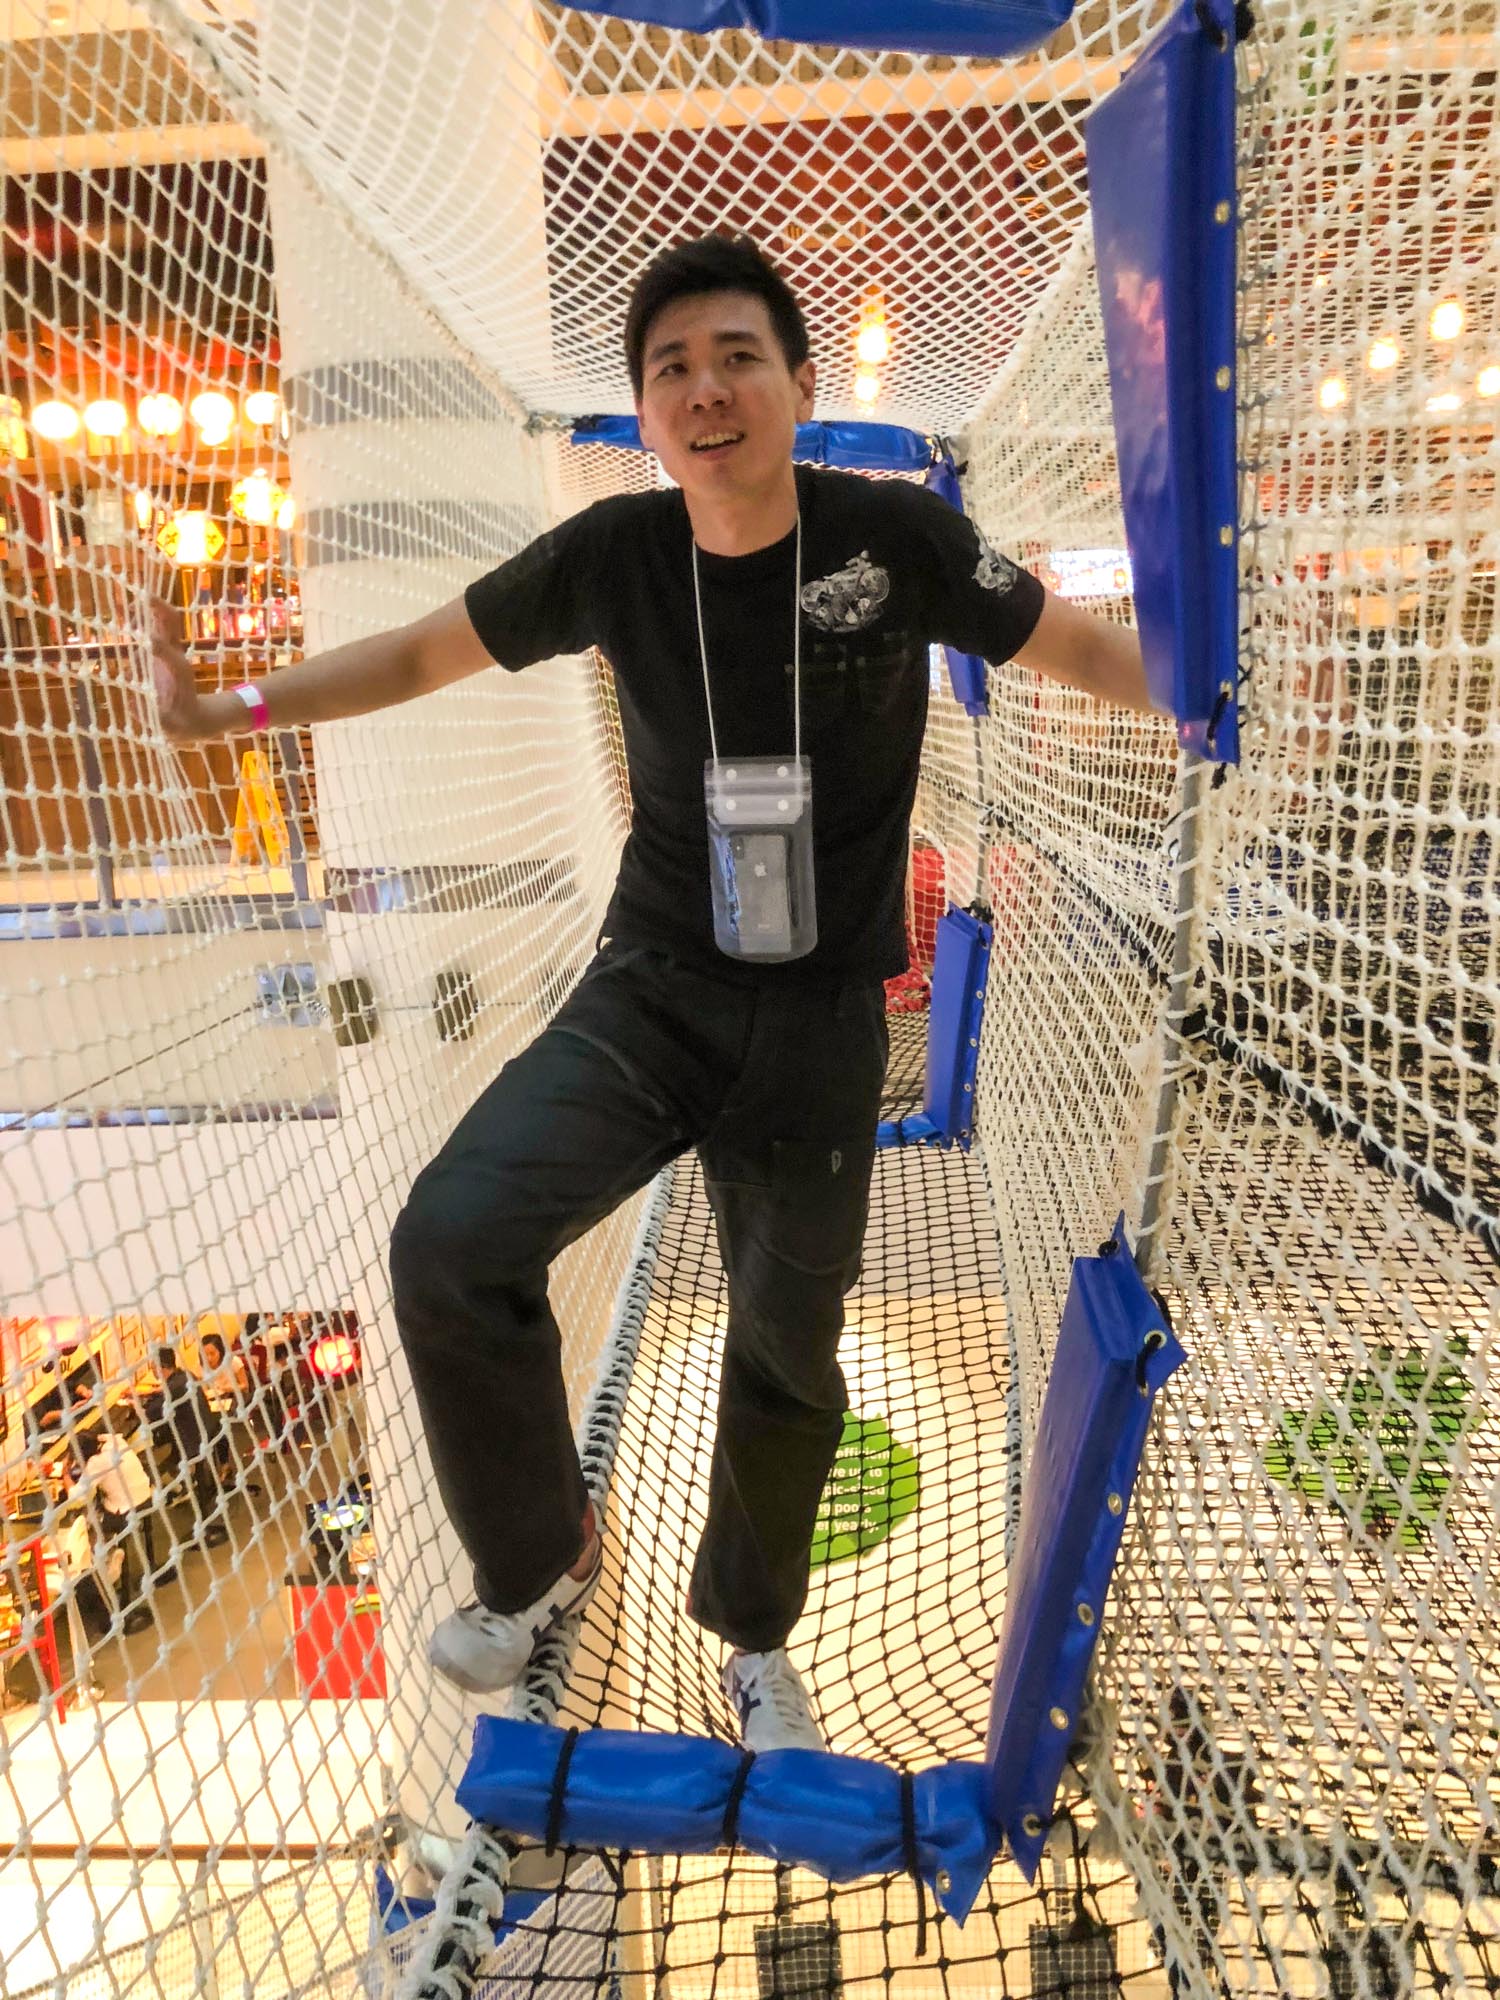 AIRZONE - The World's First Indoor Suspended Net Playground in Singapore